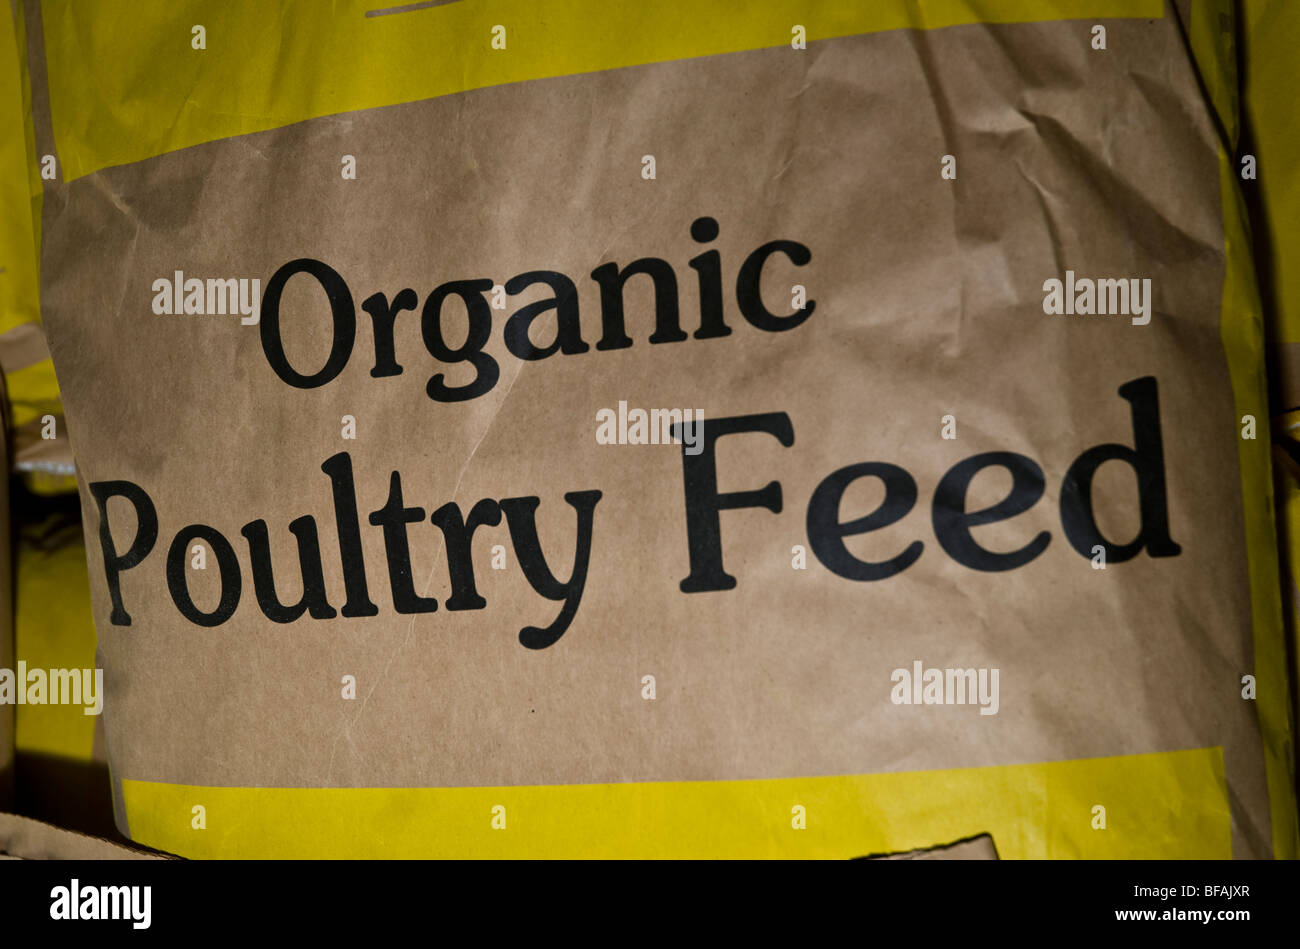 Organic poultry feed bag Stock Photo